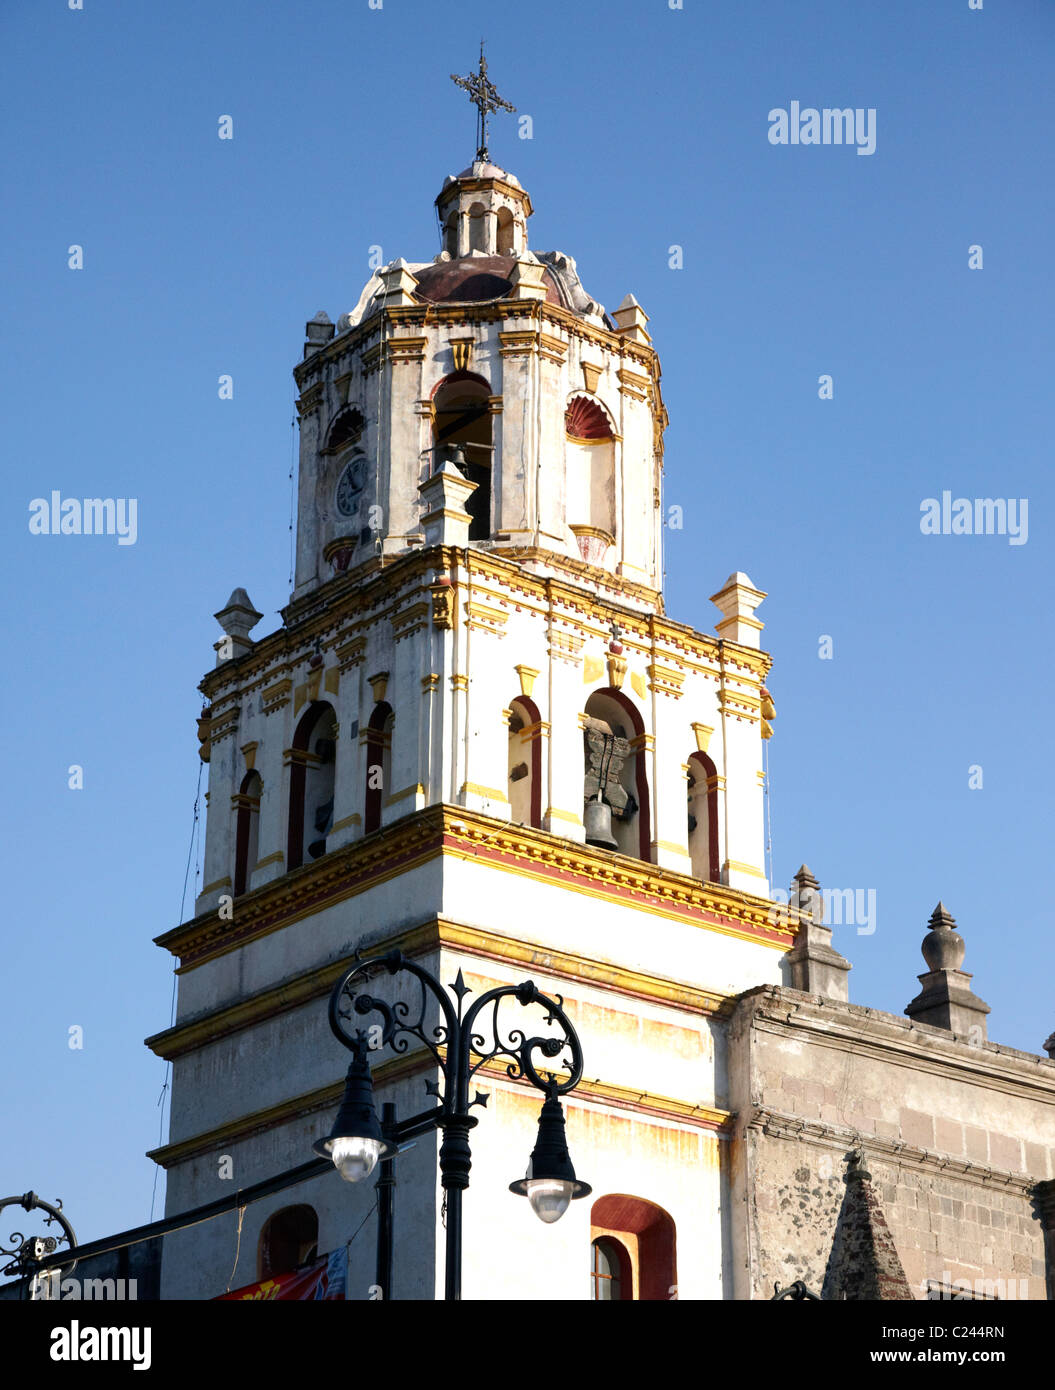 Cathedral In San Angel Mexico City Stock Photo